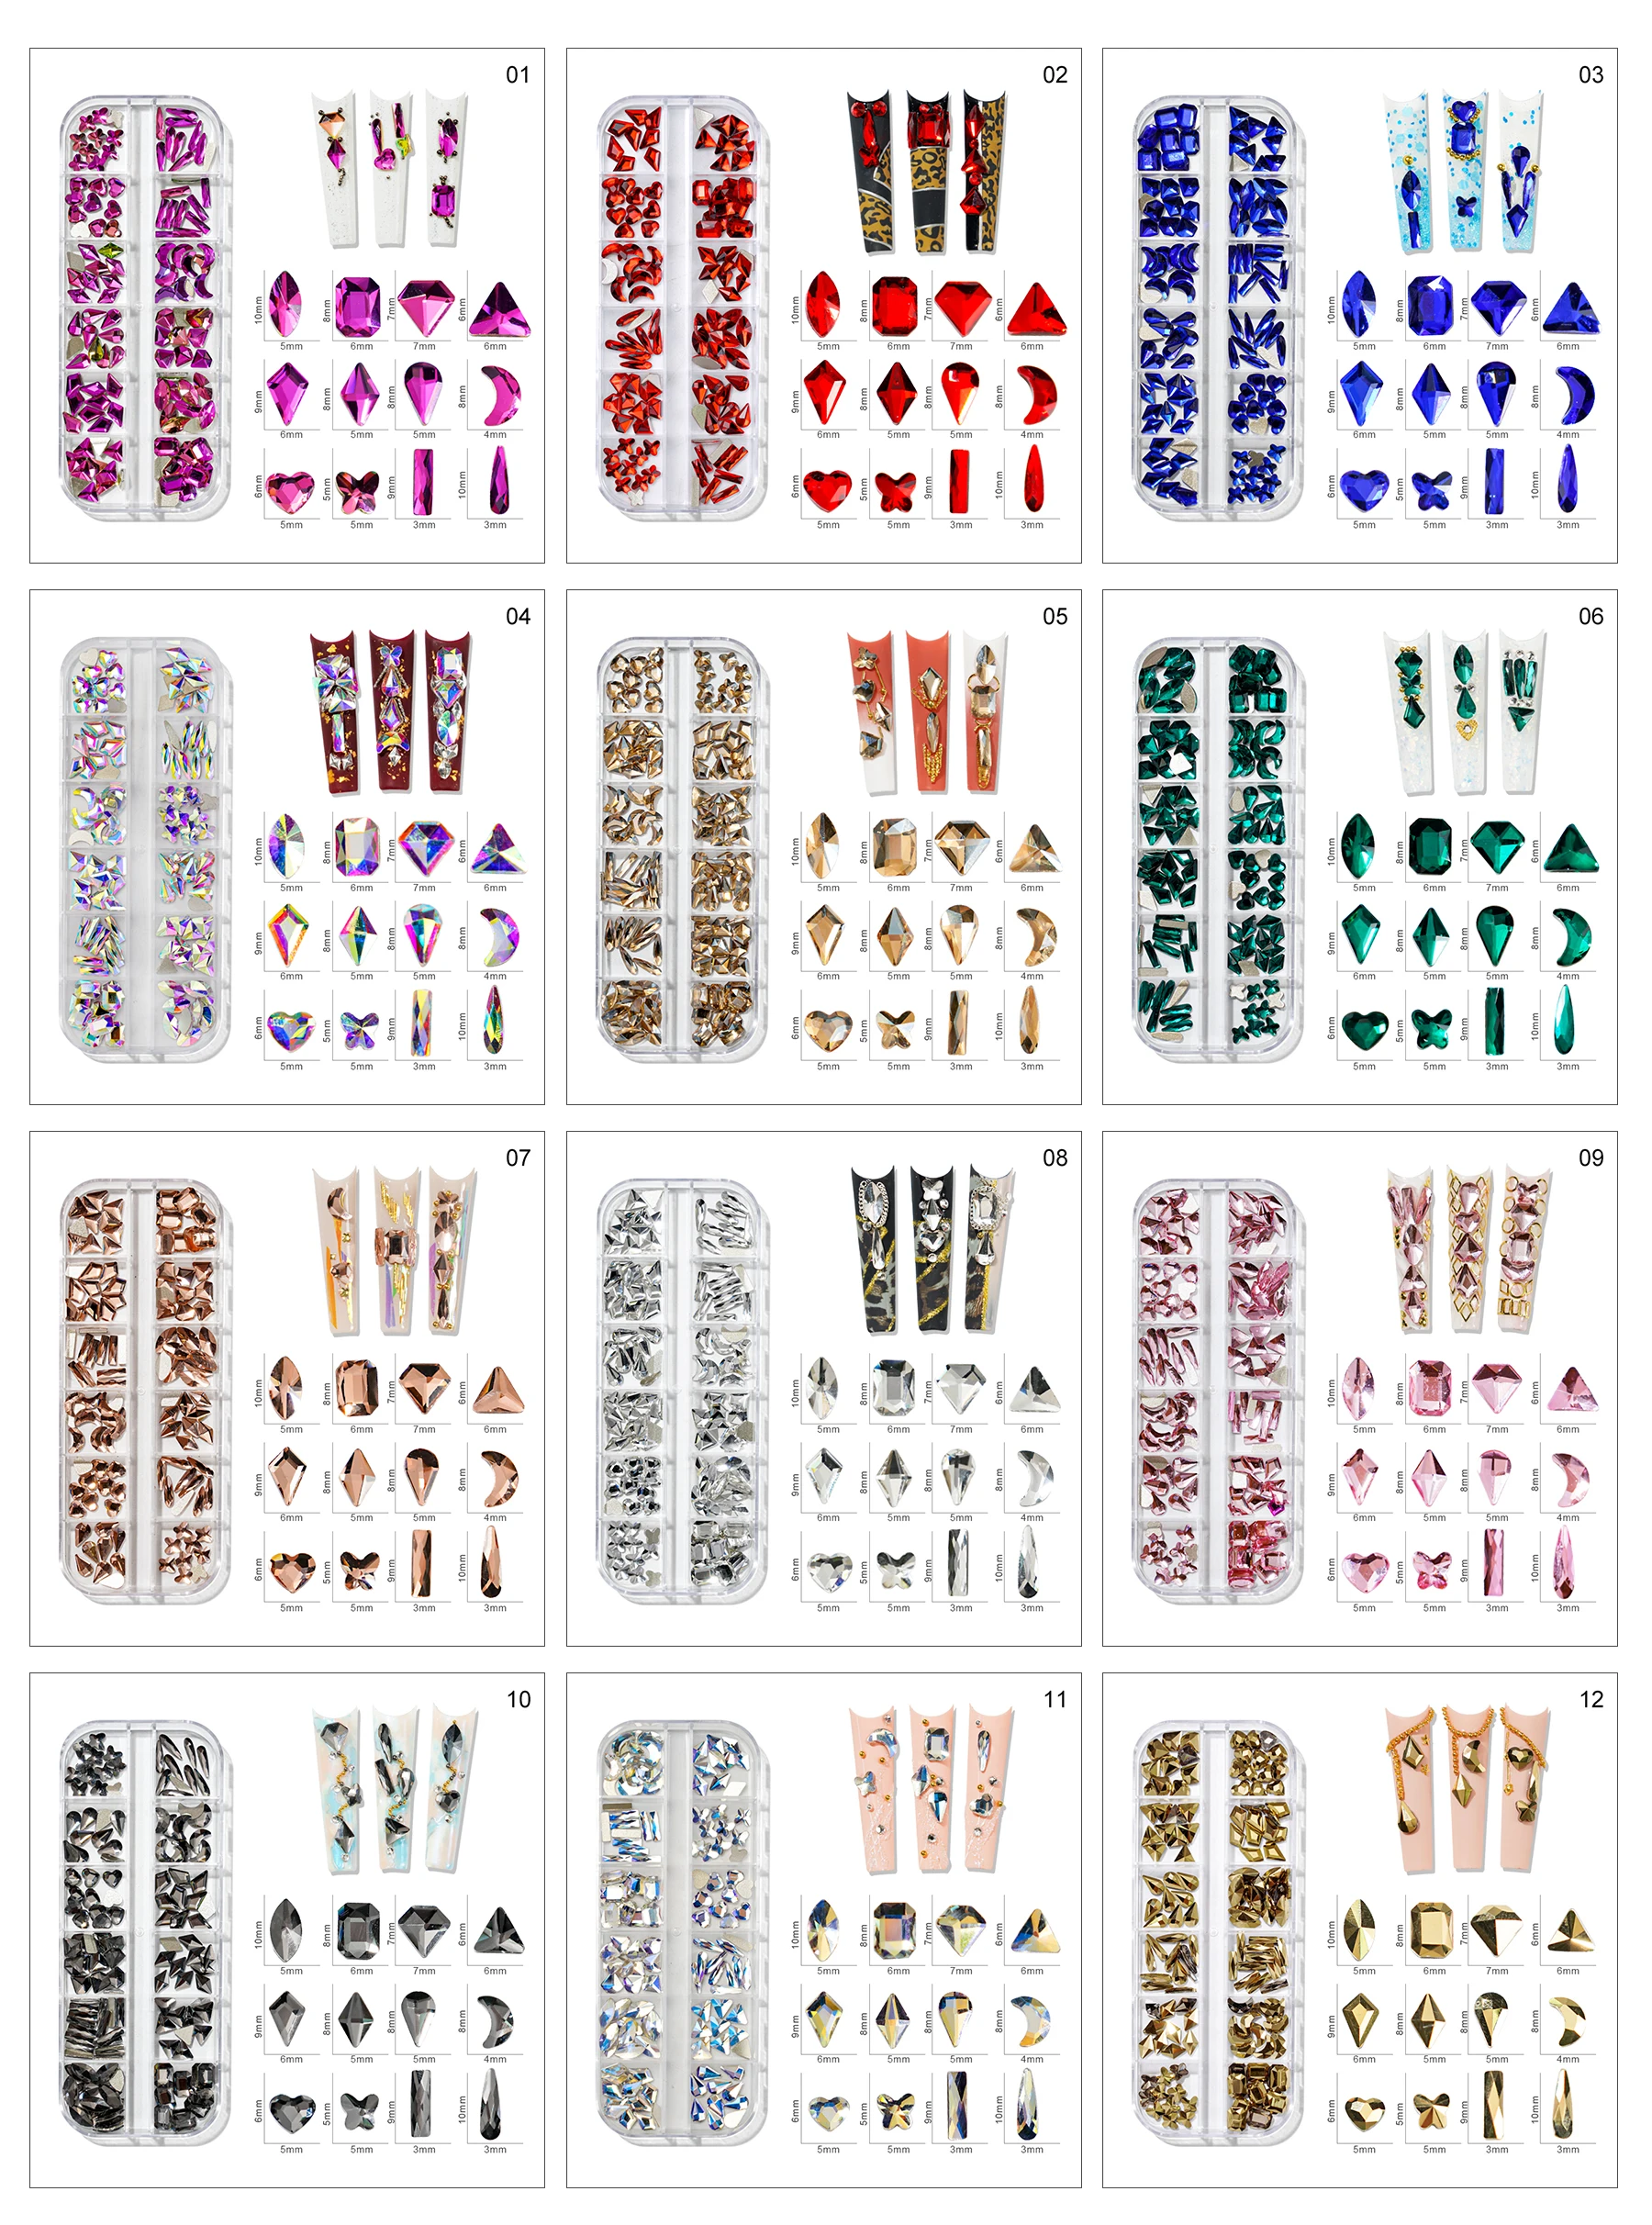 

XS 120Pcs/1Box Nails Accessories in Different Shapes DIY Crystal 3D Glass Nail art Rhinestone 2021 New Nails Trends BlingBling